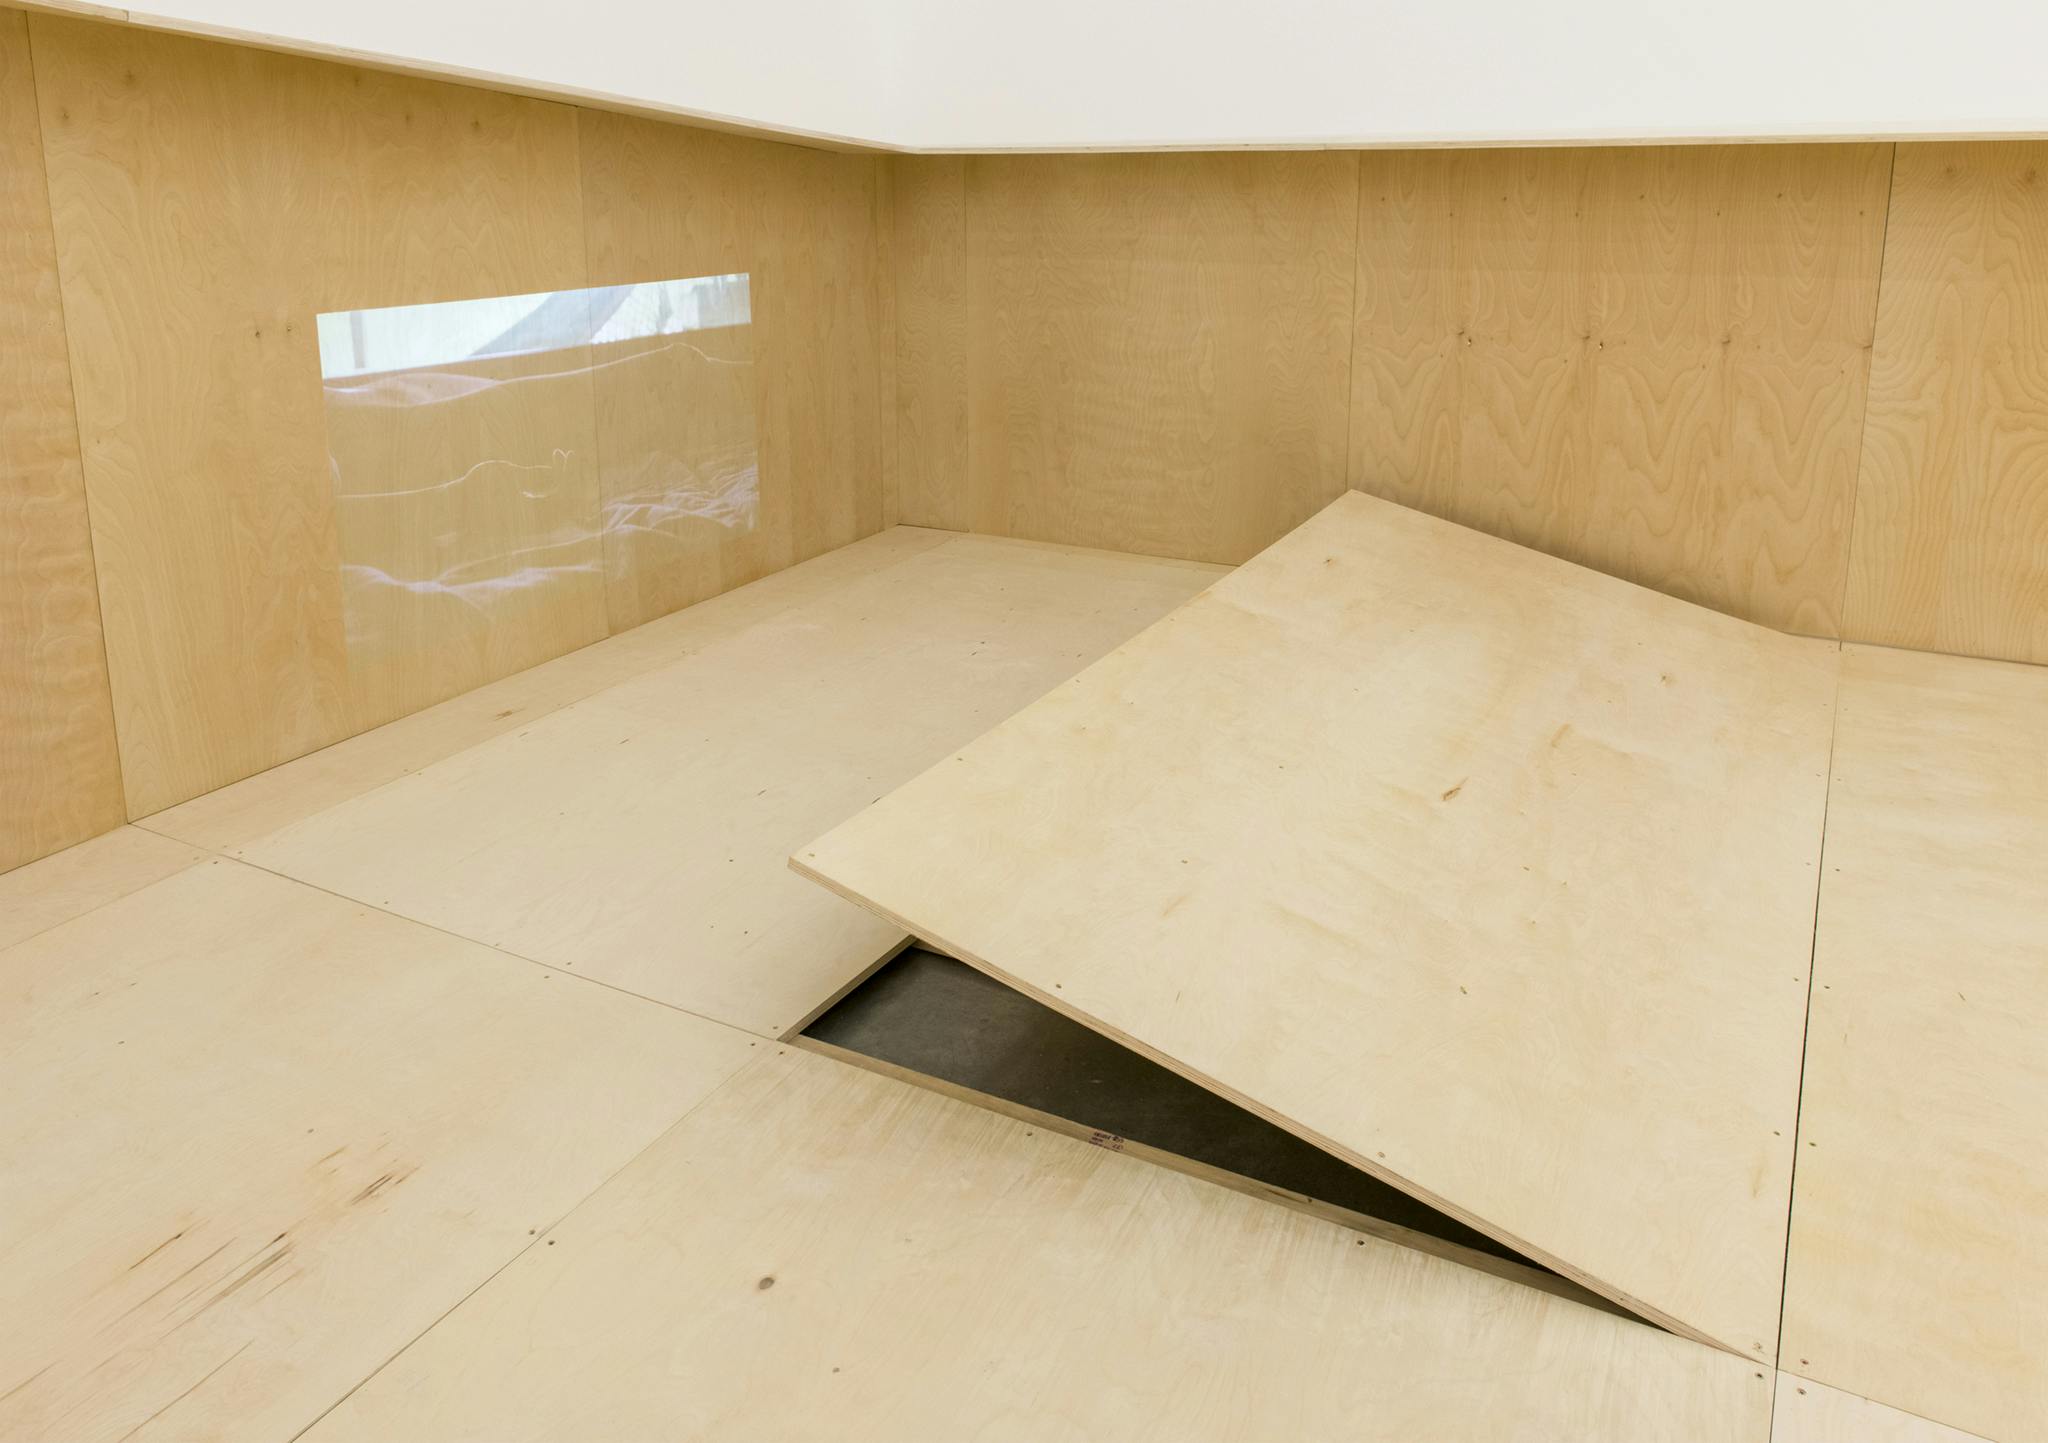 In the corner of a gallery, one of the large rectangular plywood floor panels is partially lifted up, revealing a bit of the concrete floor below. A projected image is cast on the wall opposite. 